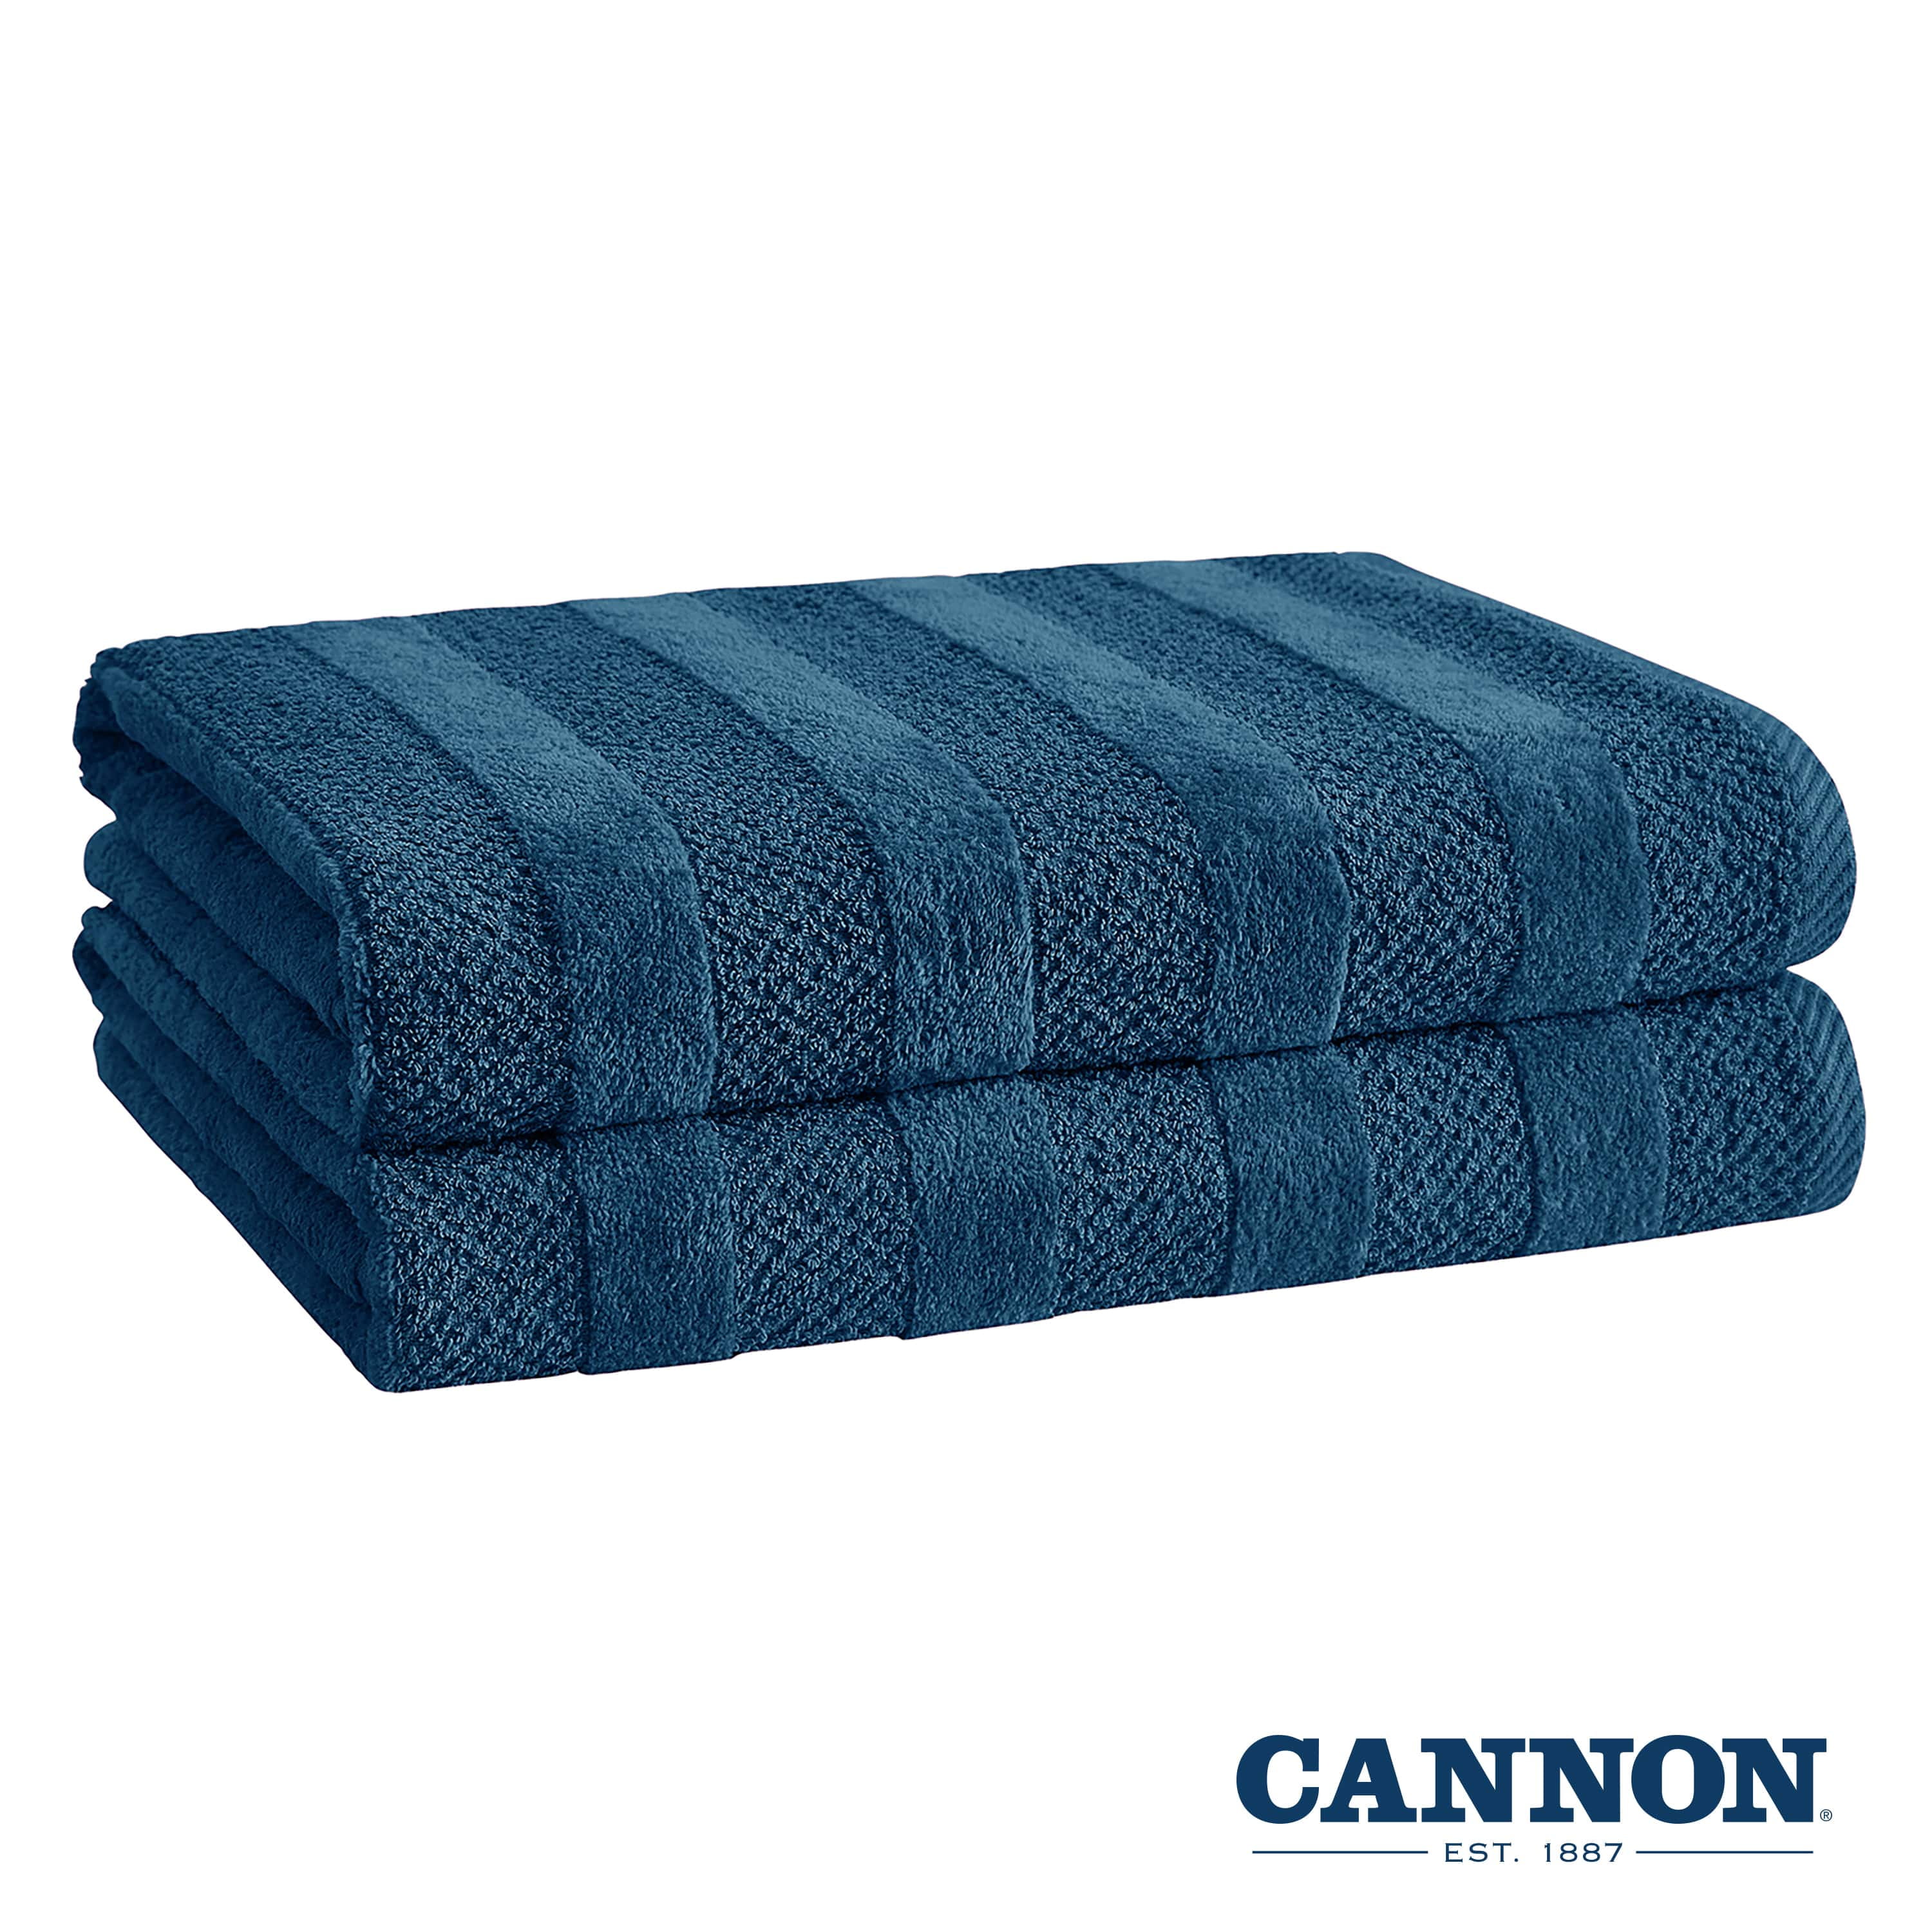 Cannon Shear Bliss Lightweight Quick Dry Cotton 2 Pack Bath Towels for Adults, Gibralter Sea